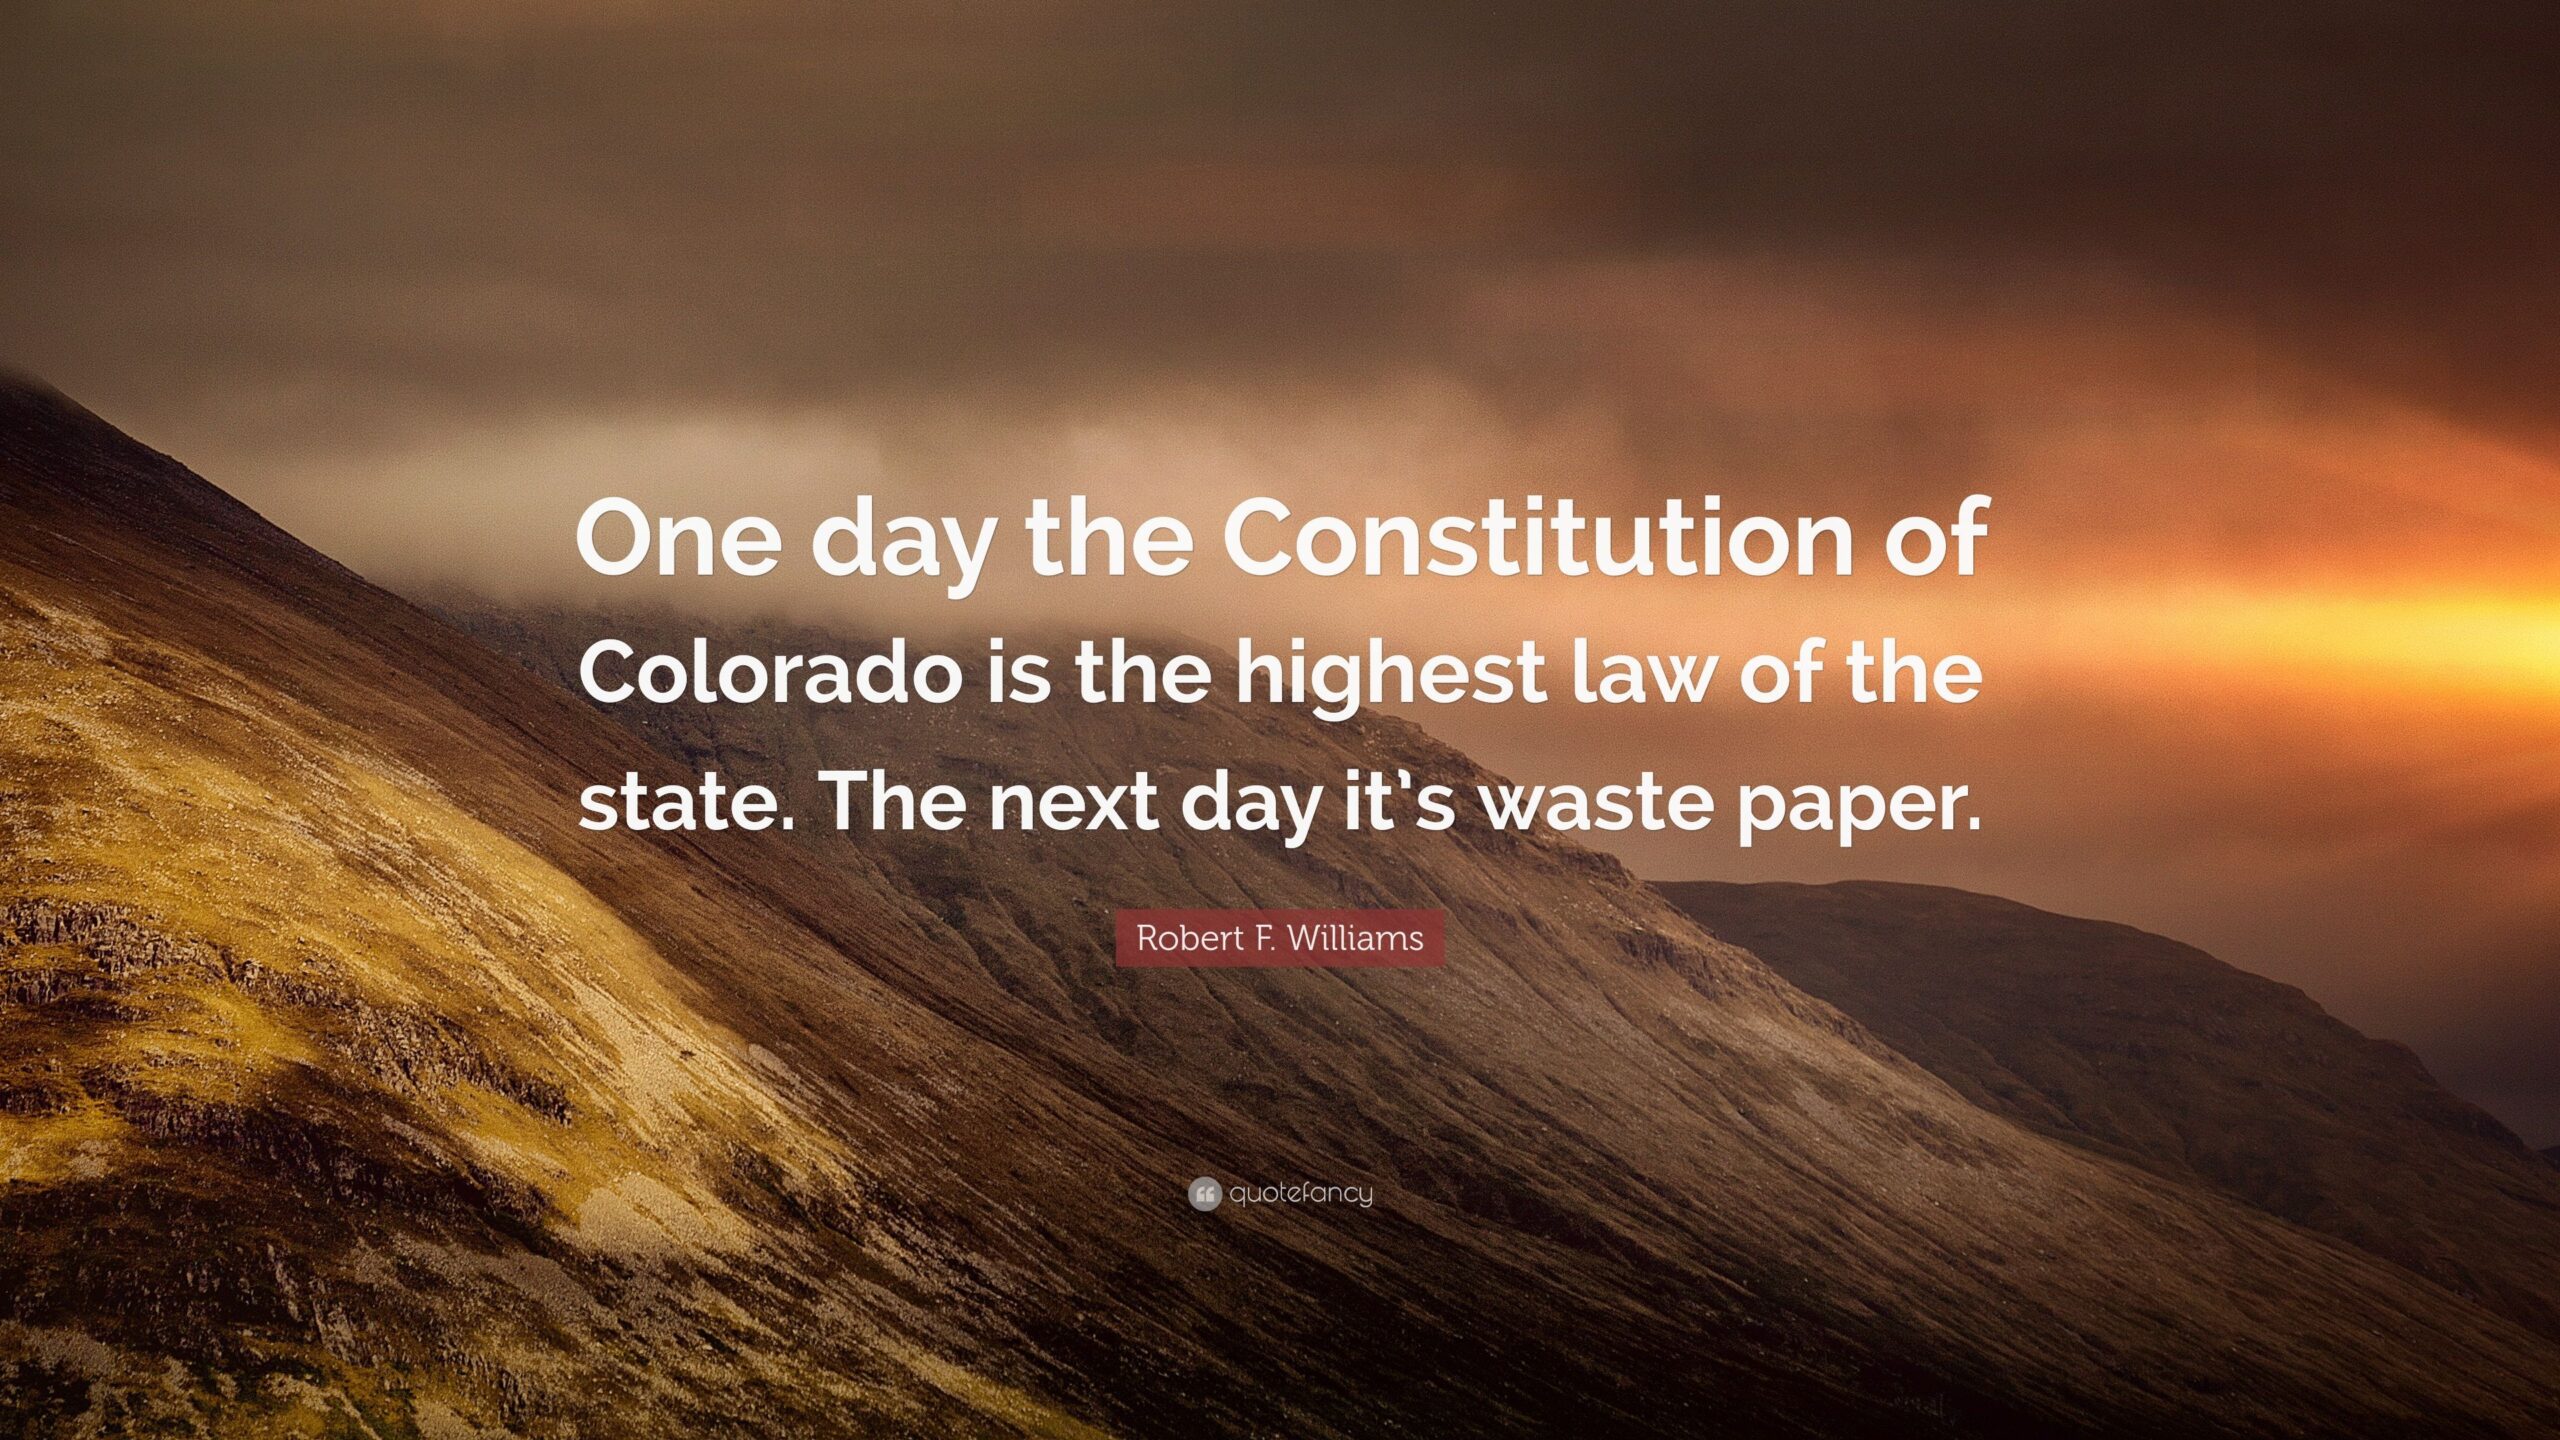 Robert F Williams Quote “One day the Constitution of Colorado is